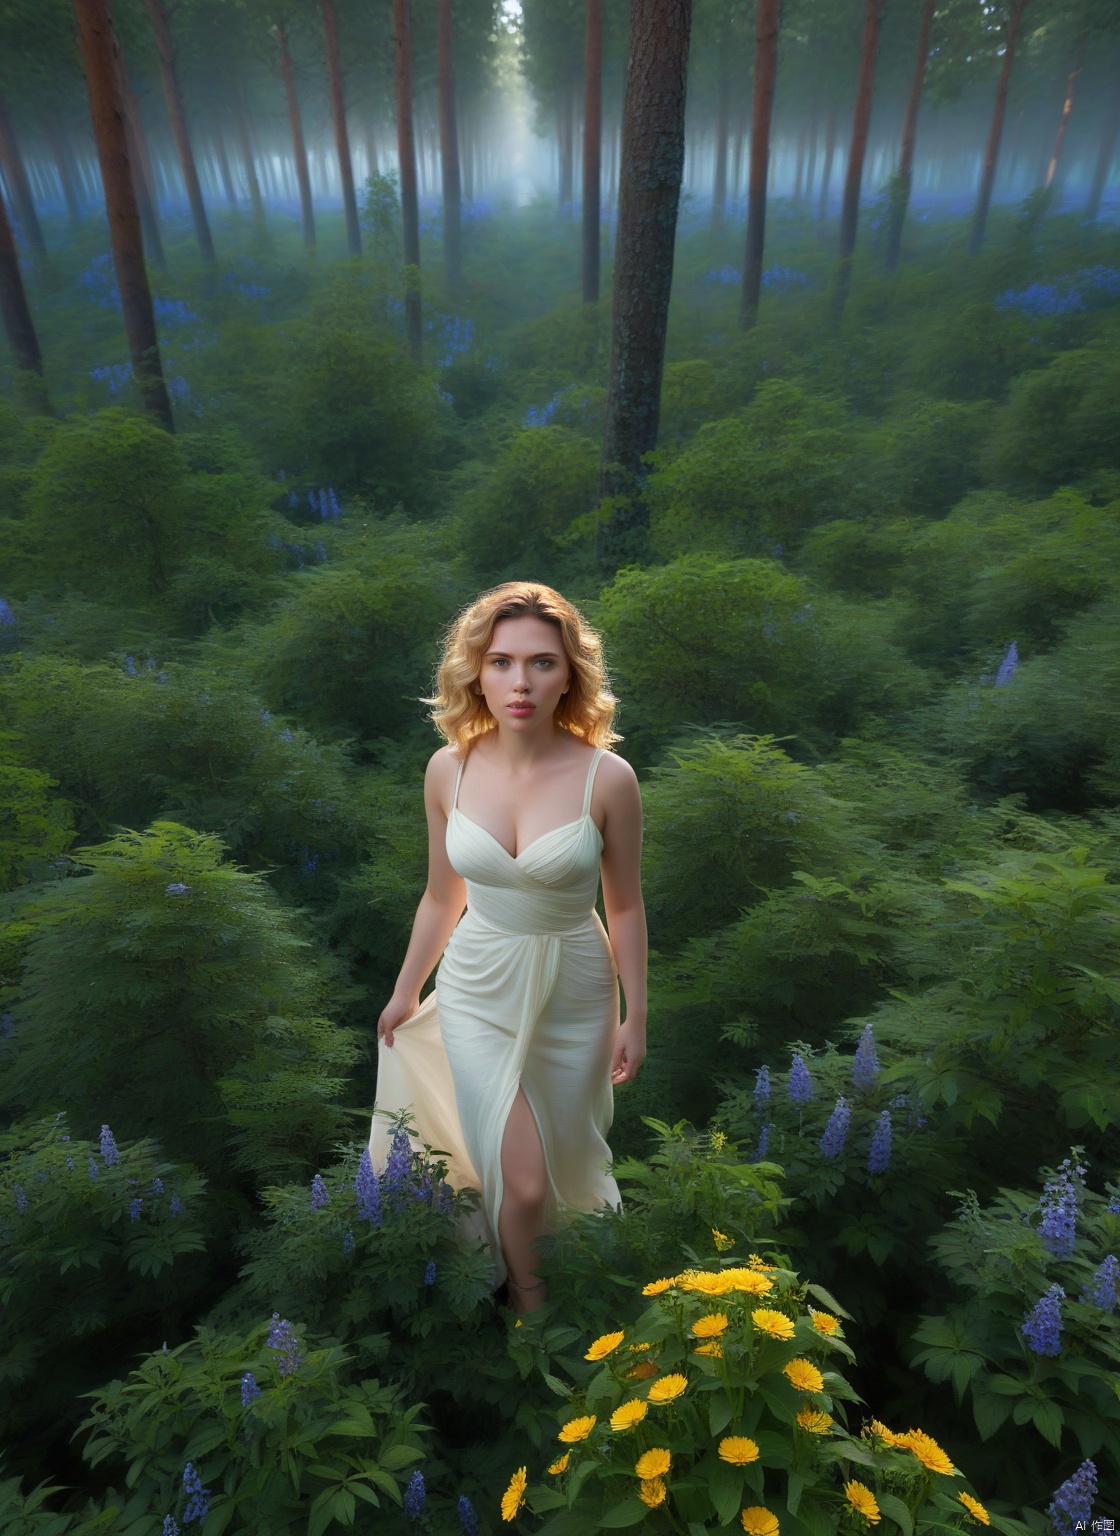  4k, photo, realistic, best quality,highres, ultra-detailed,ultra high res,((photorealistic, 8K)),from above, 

Best Picture Quality: A breathtaking photograph of a young woman standing in a lush green forest, surrounded by vibrant flowers and tall trees. She is wearing a simple white dress that flows gently in the breeze, and her long, wavy blonde hair frames her face in soft curls. The lighting is natural and warm, creating a sense of peace and tranquility. This photo is of the highest quality, with exceptional detail and color accuracy. Scarlett Johansson